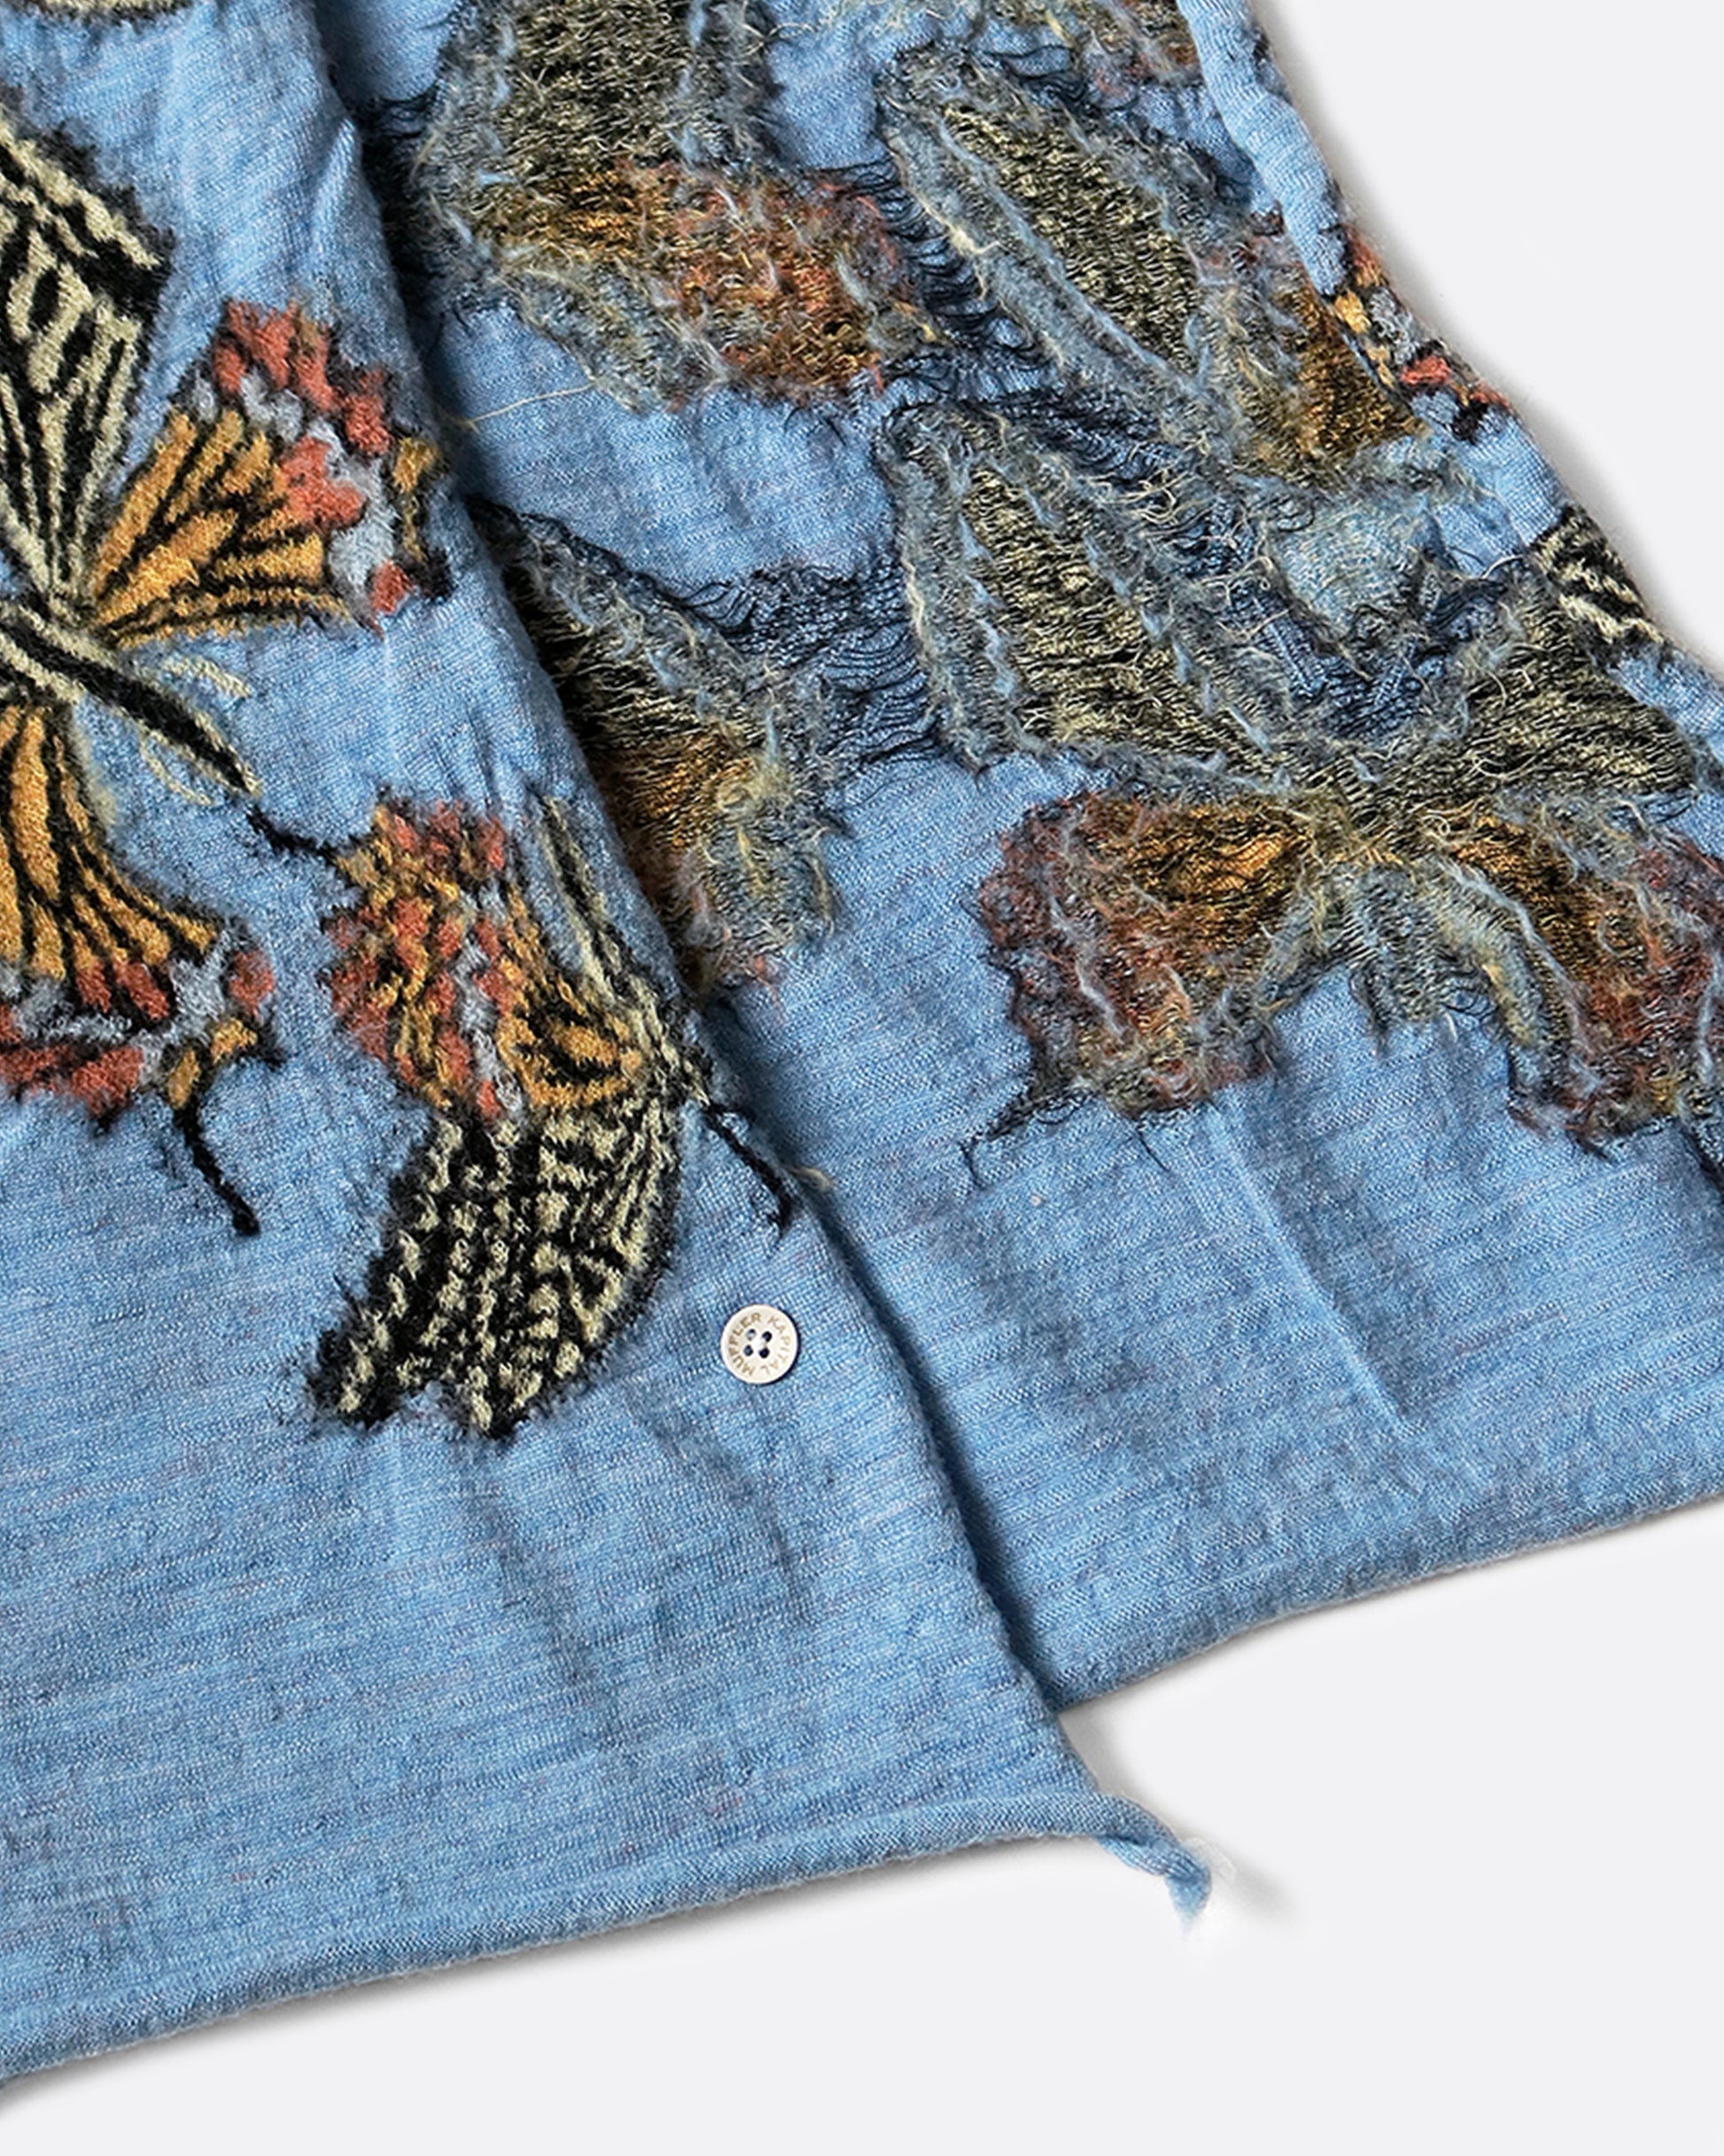 A sky blue scarf with butterflies on it.